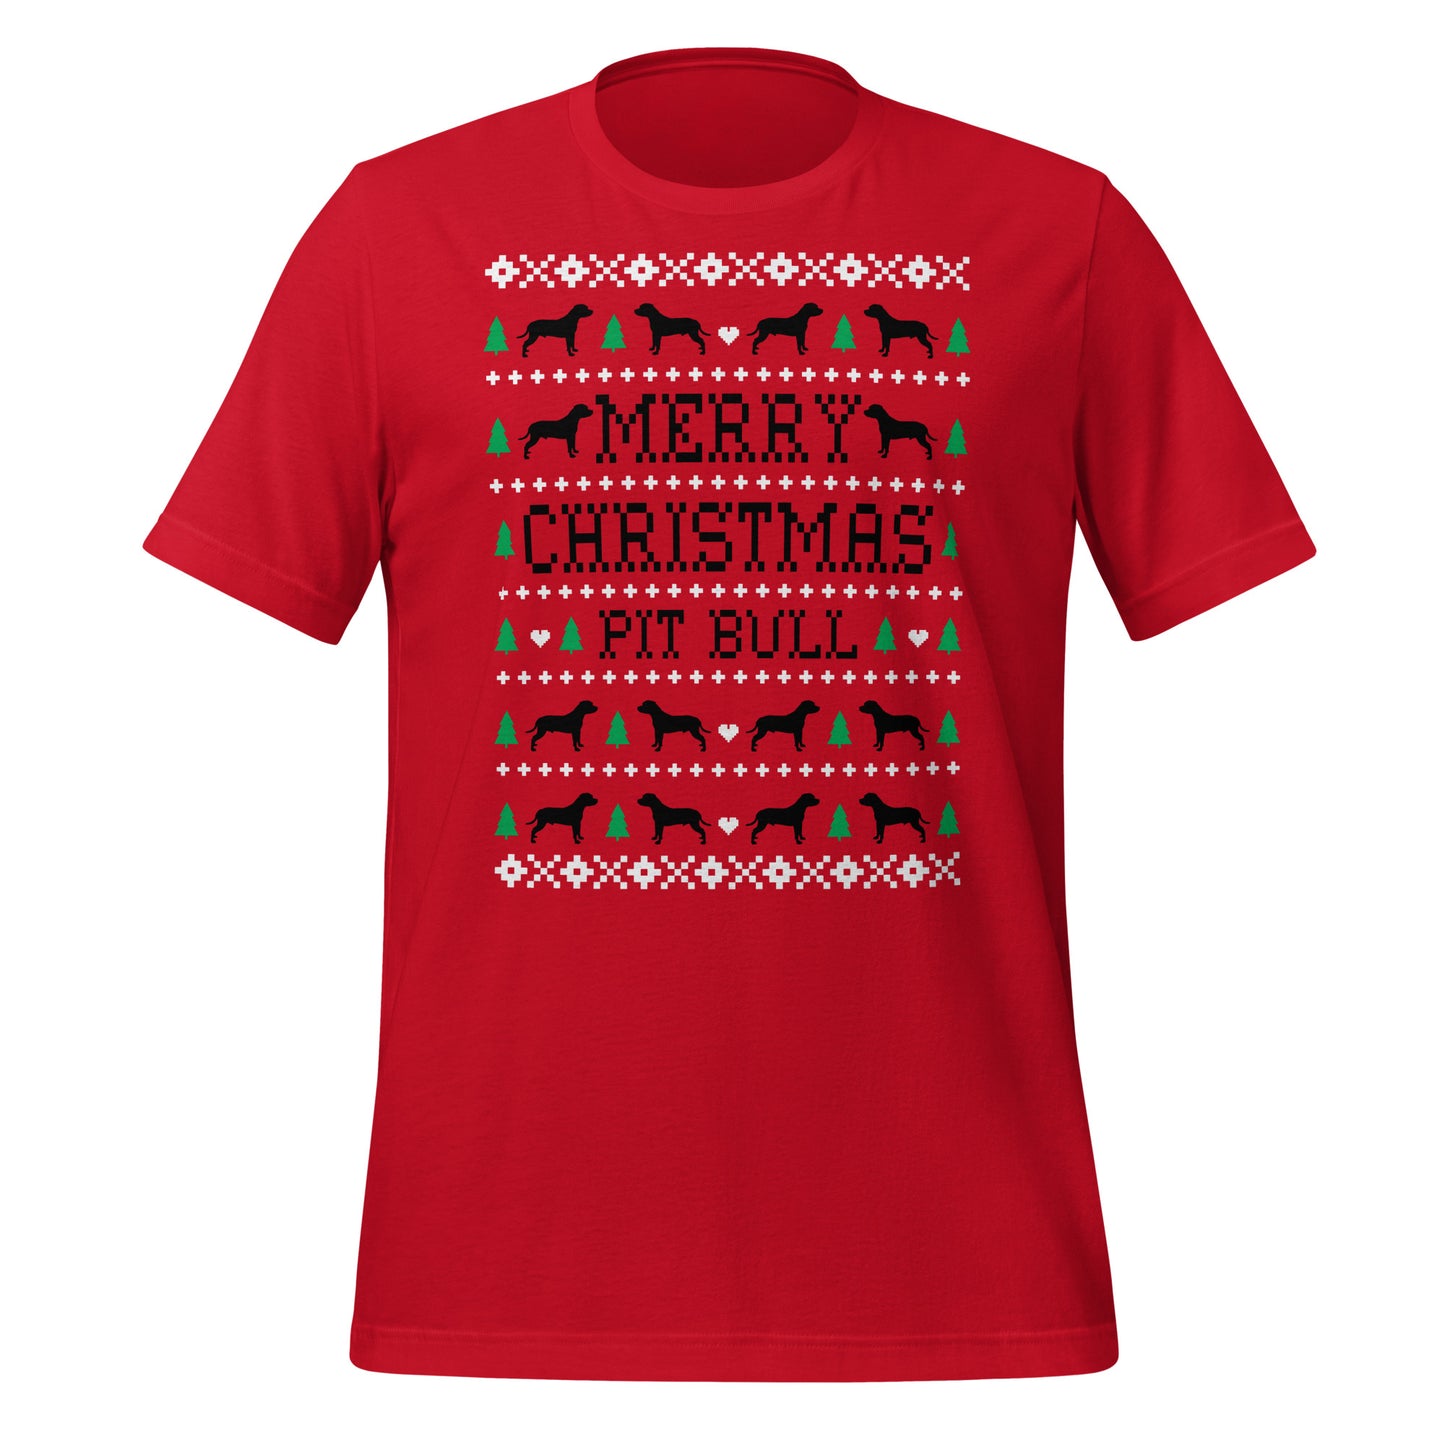 Pit Bull ugly Christmas unisex t-shirt red by Dog Artistry.